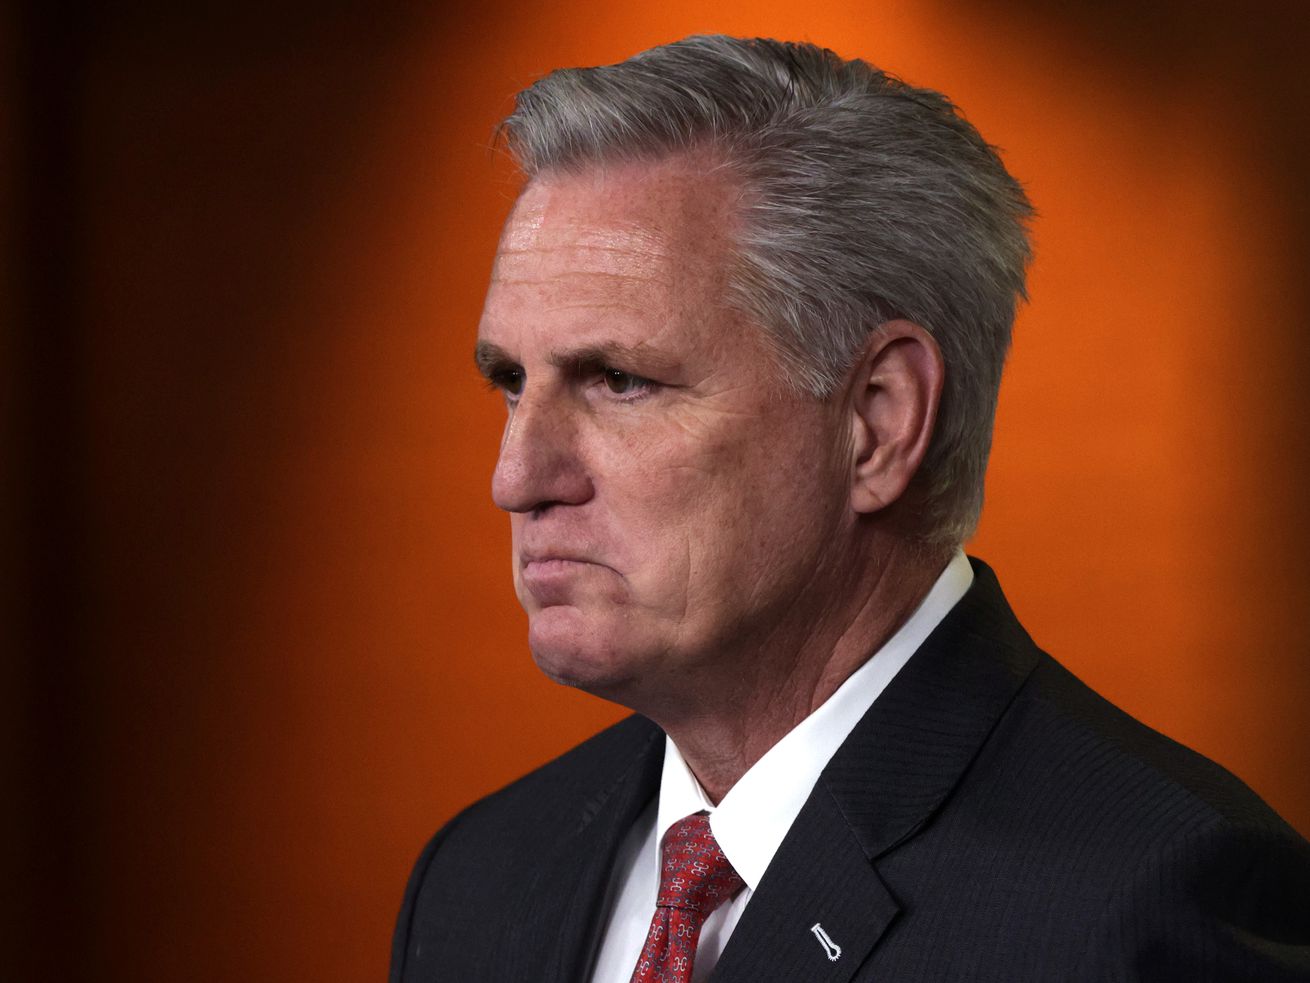 Kevin McCarthy, in a black suit and red tie, looks to the left with a scowl on his face, against a dark orange background.